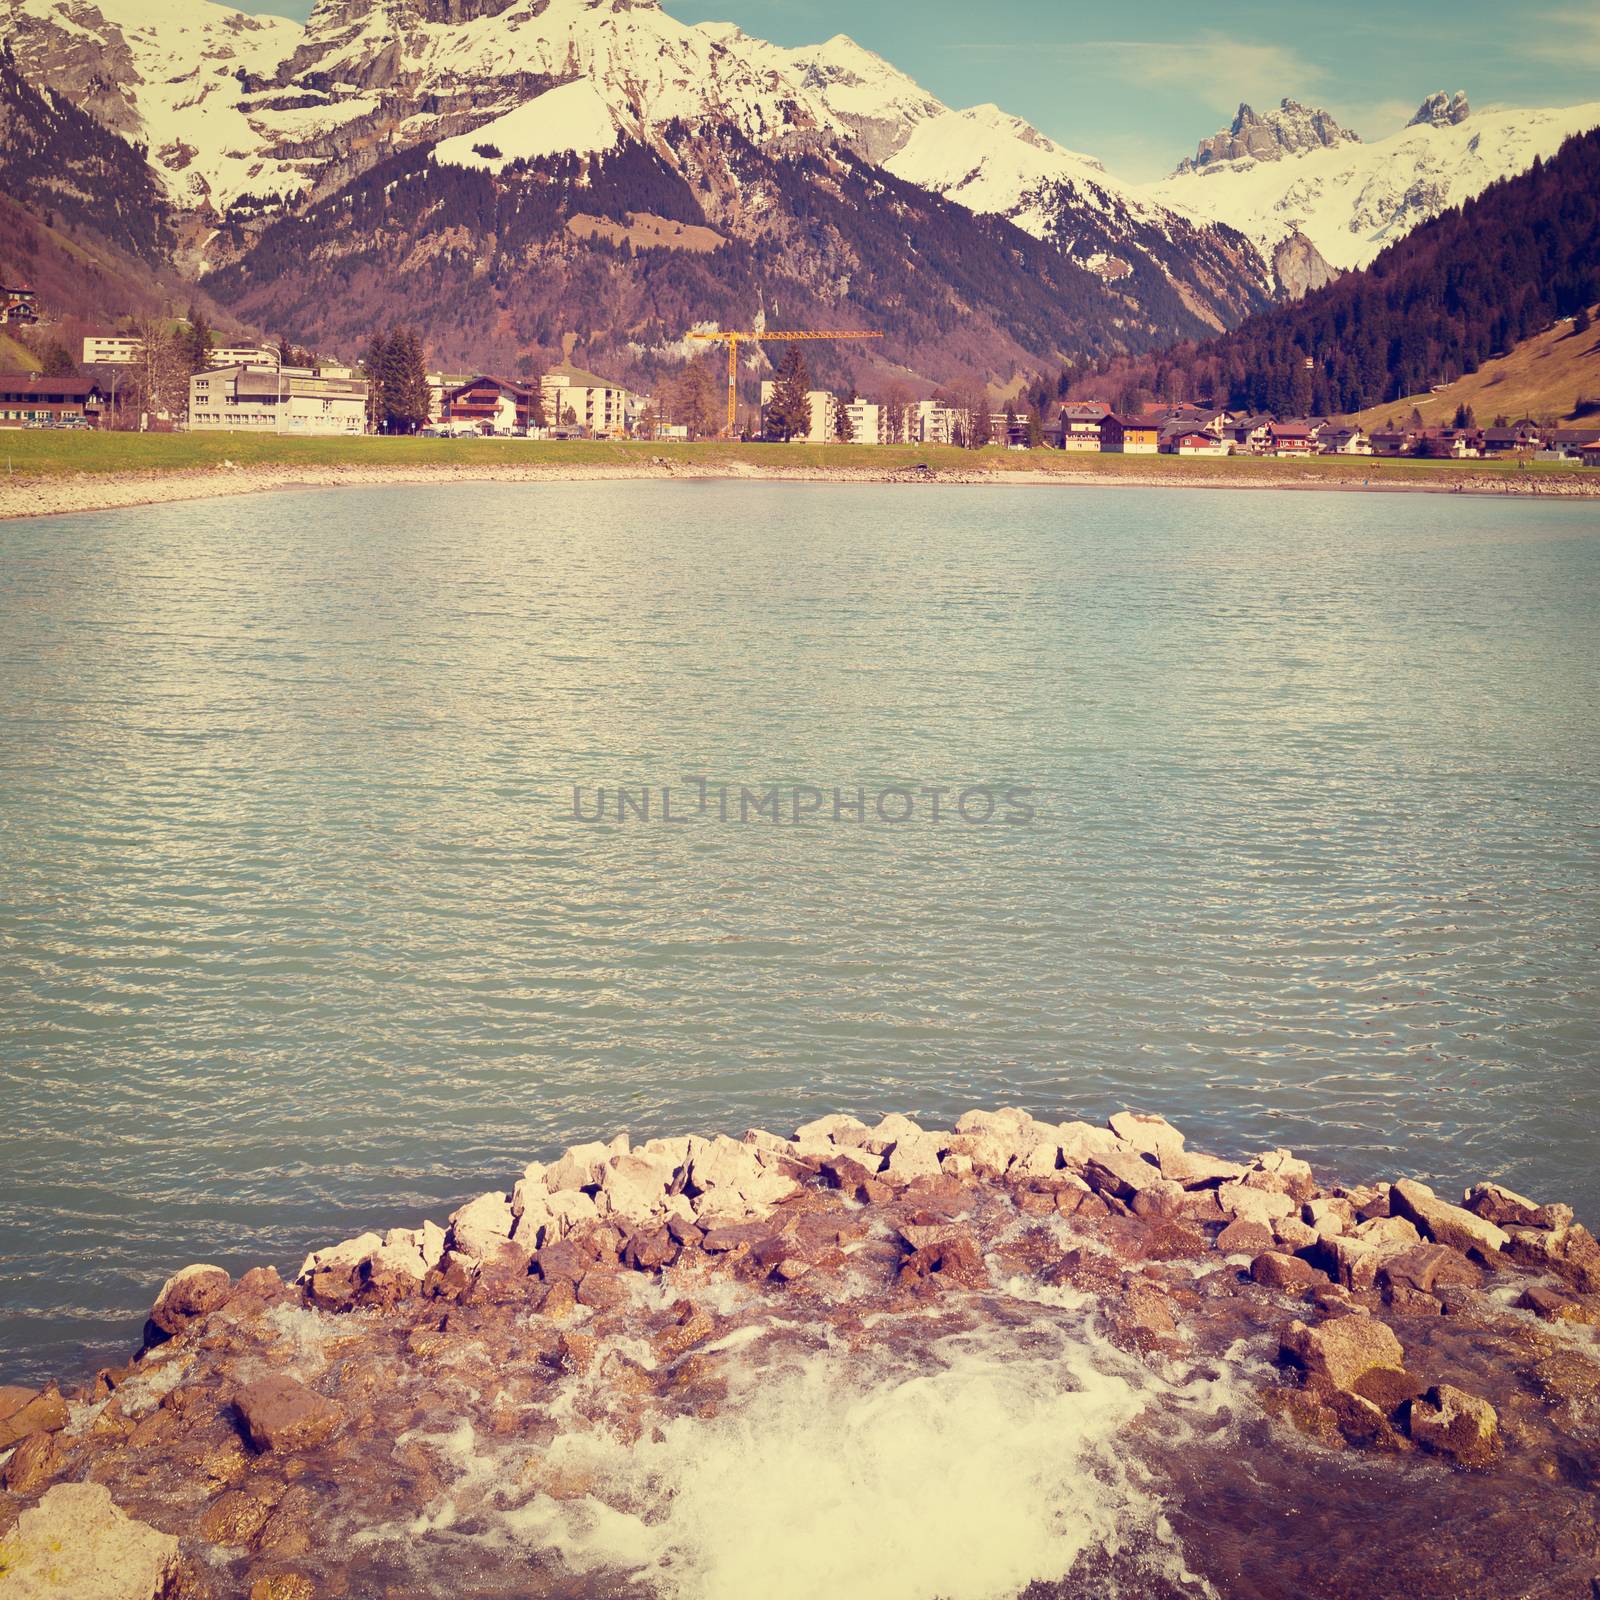 Pond on the Background of Snow-capped Alps in Switzerland, Instagram Effect